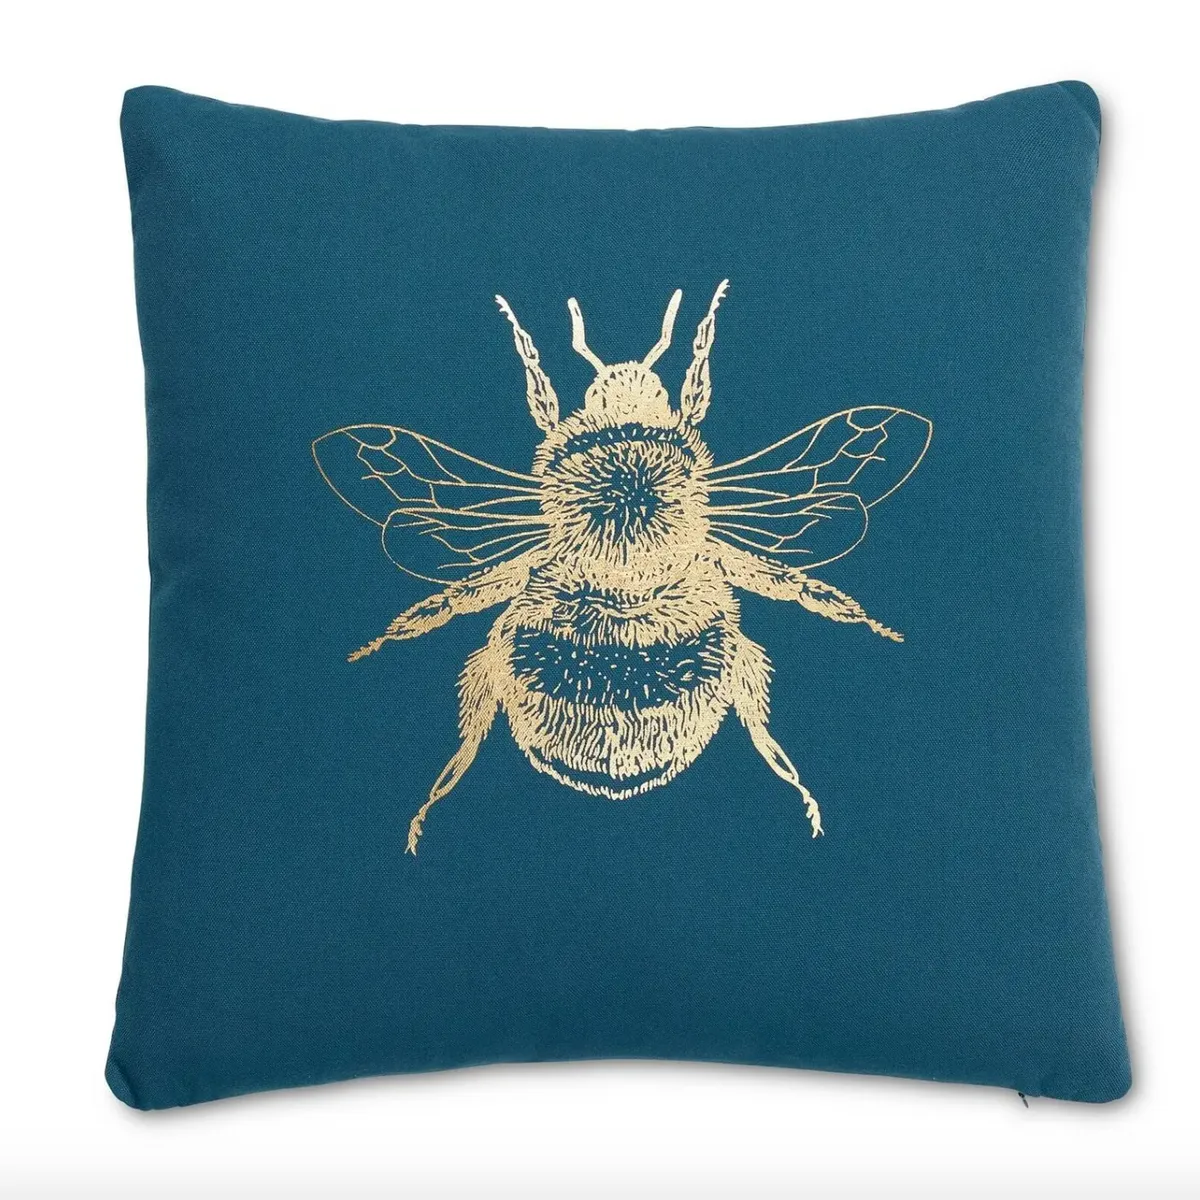 Bee Cushion in Teal and Gold